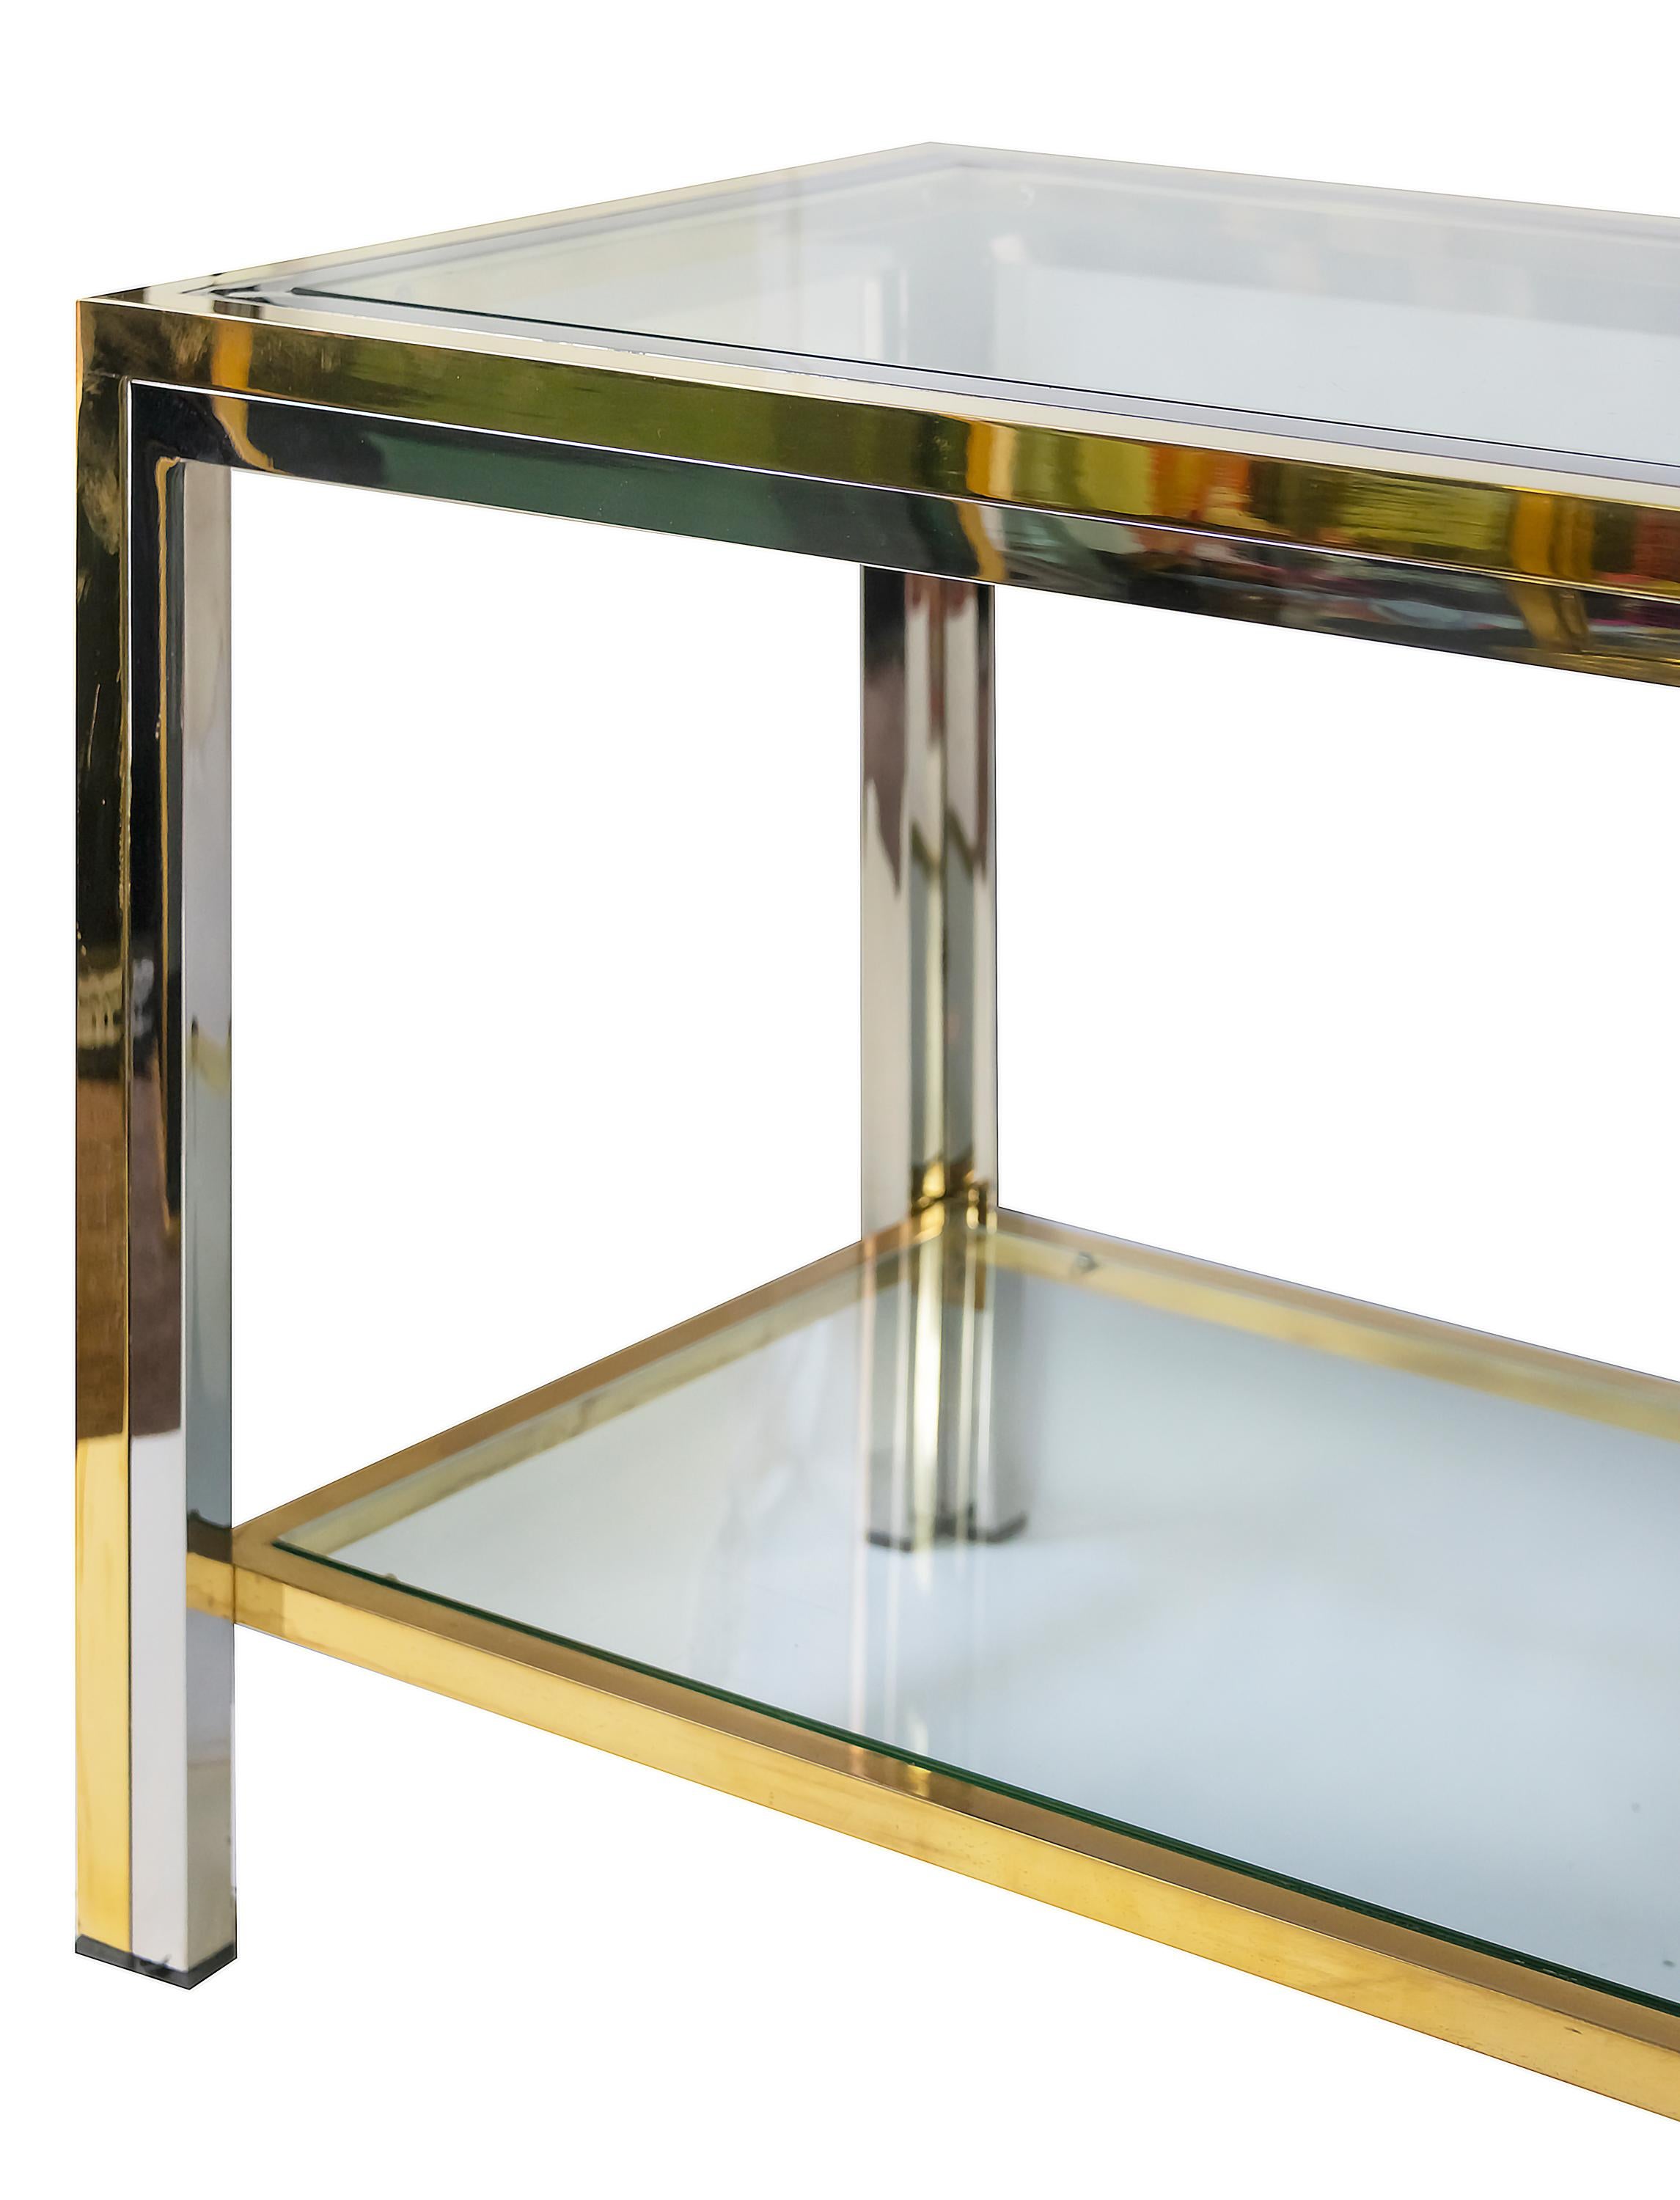 20th Century Midcentury Brass, Chrome and Glass Low Console Table by Romeo Rega For Sale